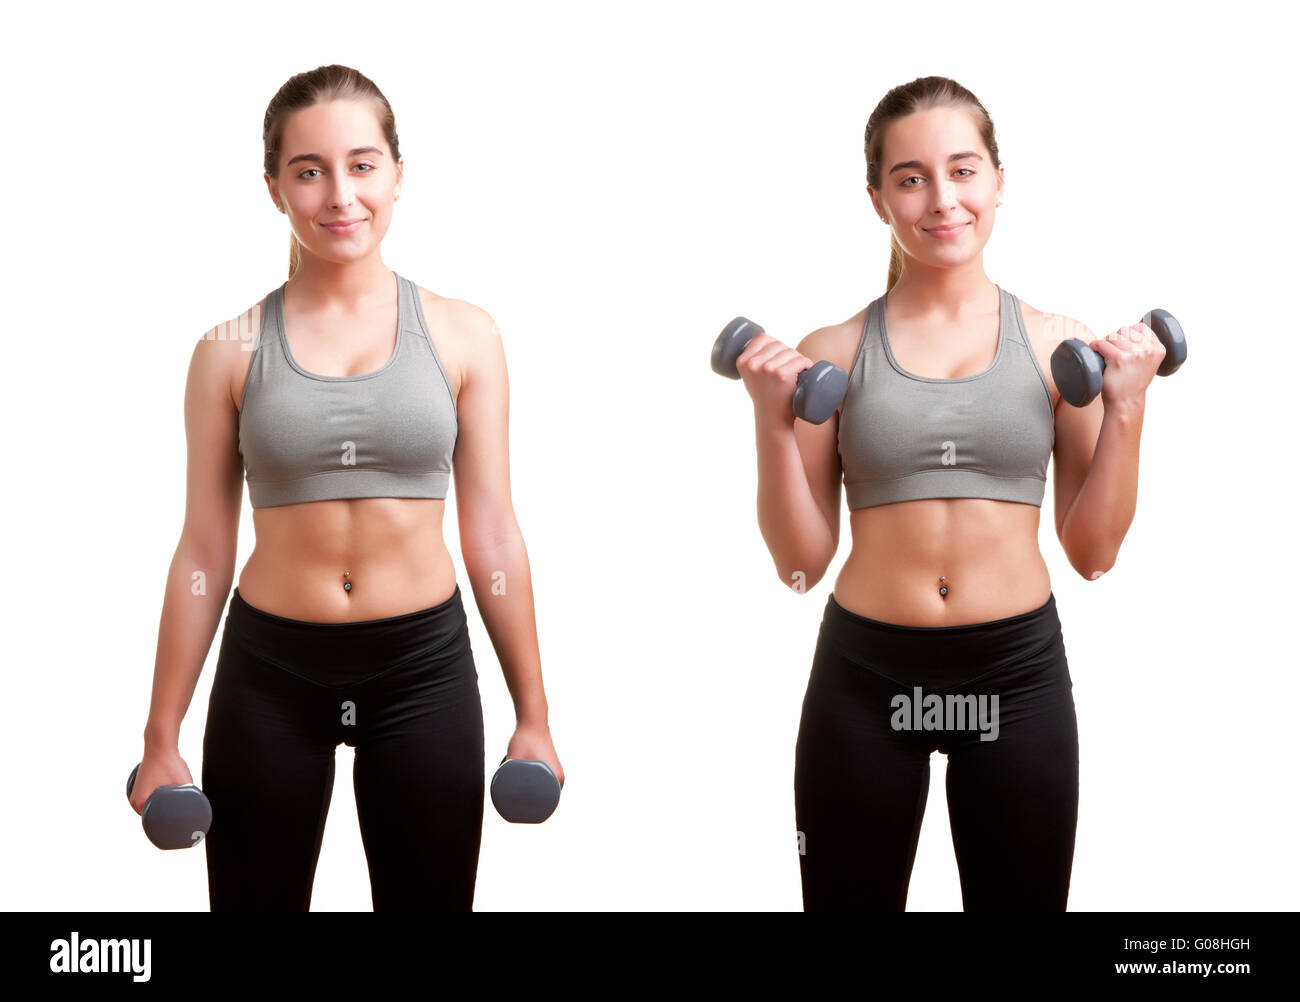 1,220 Woman Doing Bicep Curls Images, Stock Photos, 3D objects